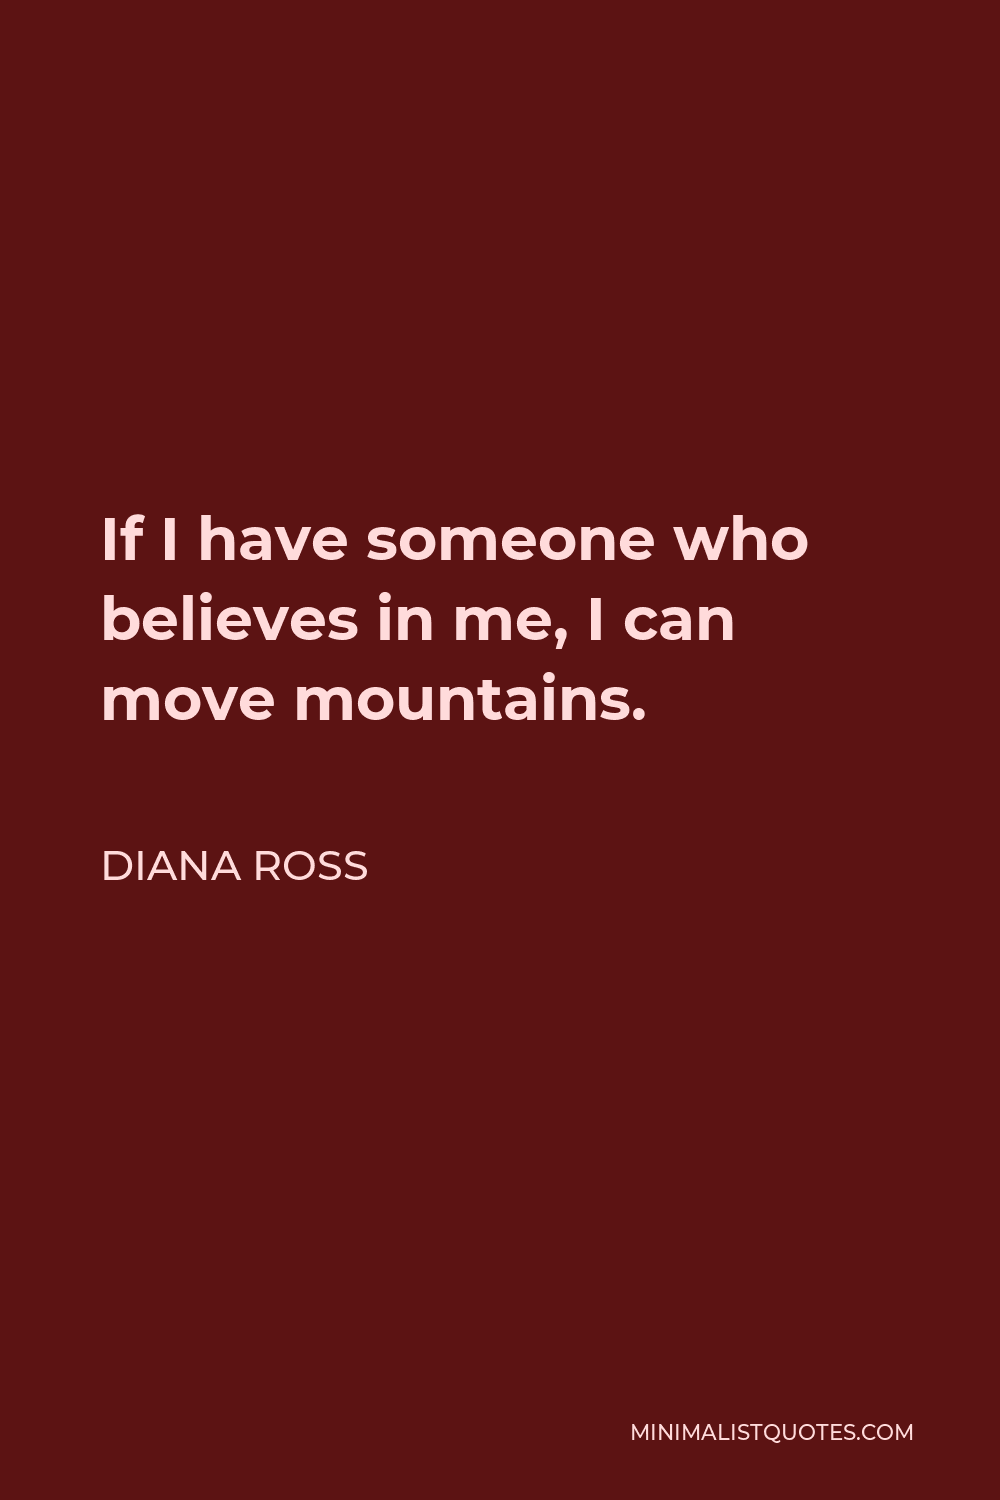 Diana Ross Quote - If I have someone who believes in me, I can move mountains.